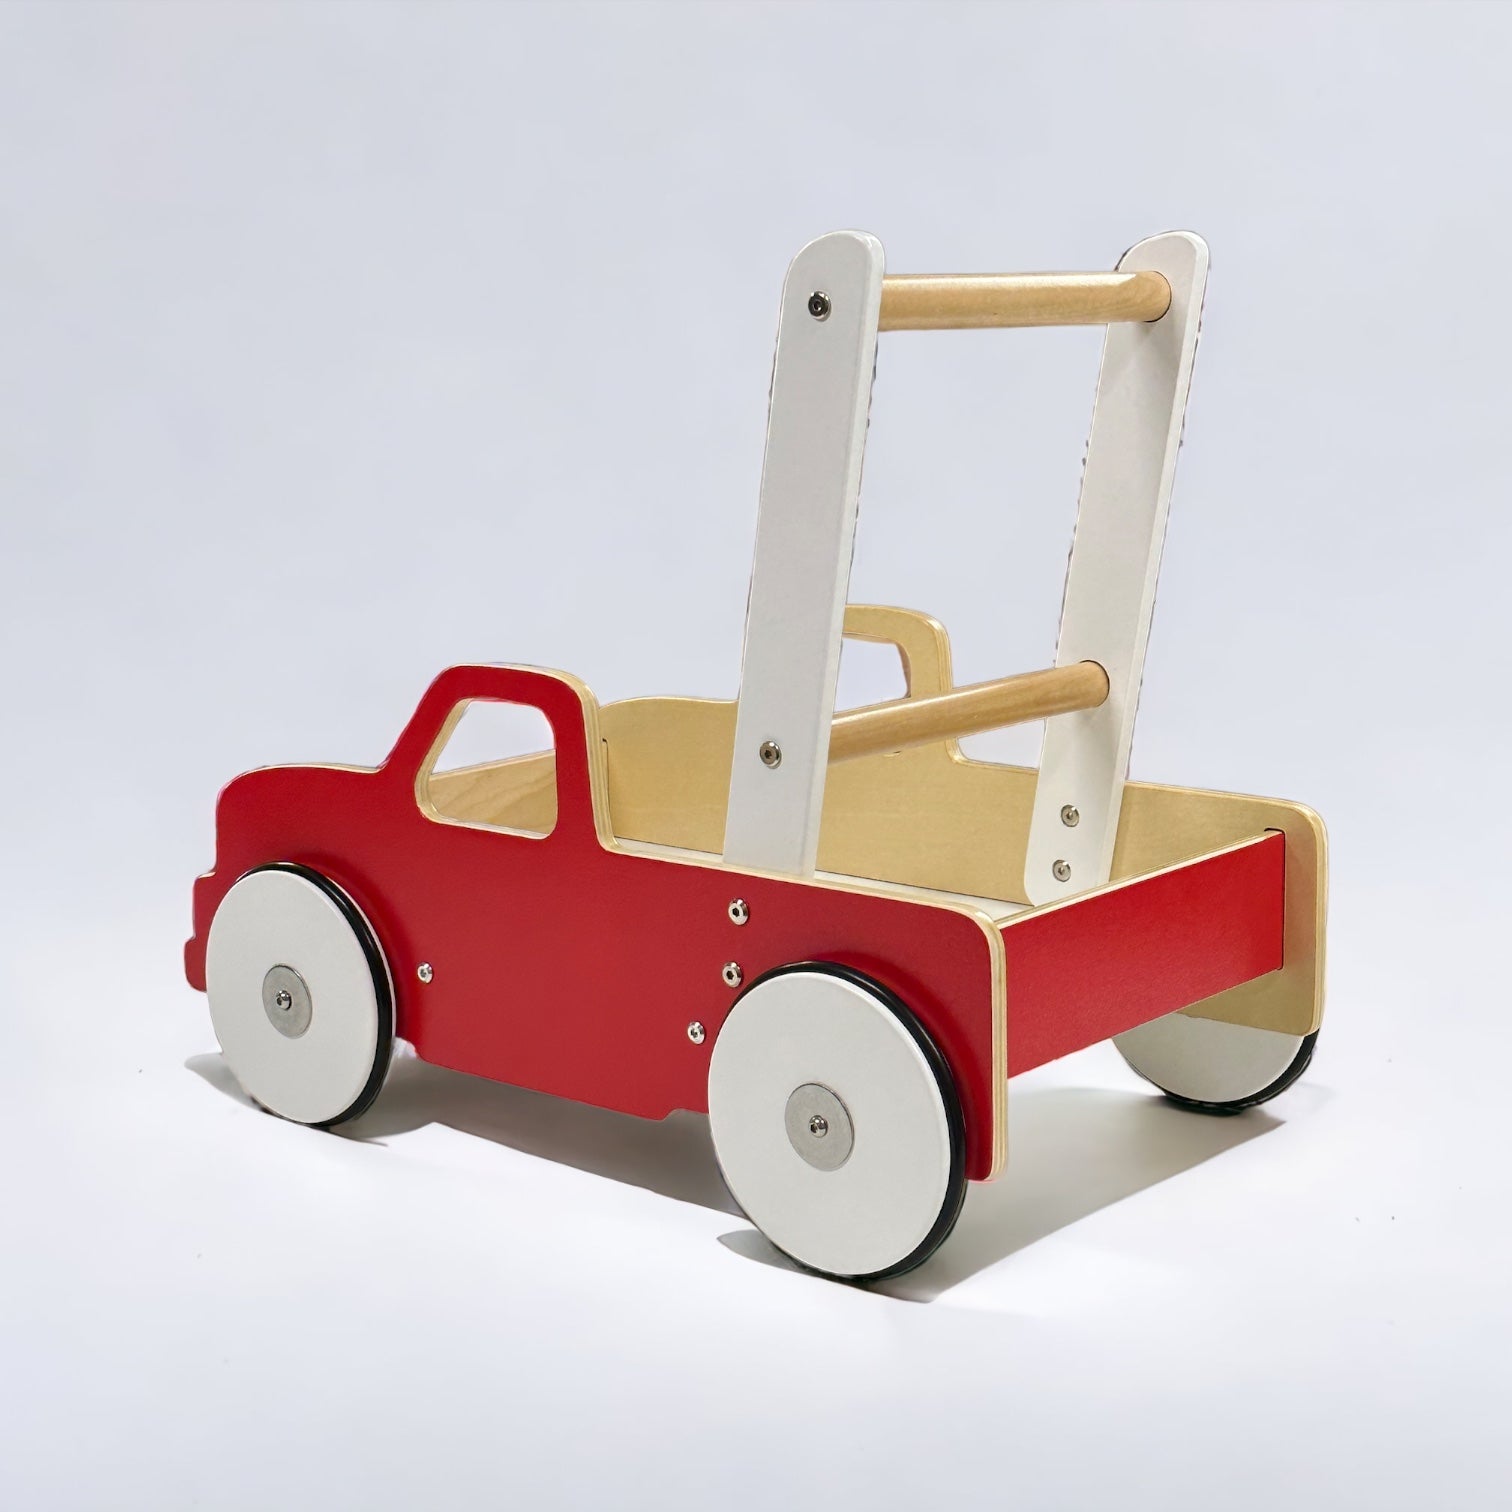 Luma Buggy: Red Truck Handcrafted Baby Wooden Push Walker Cart